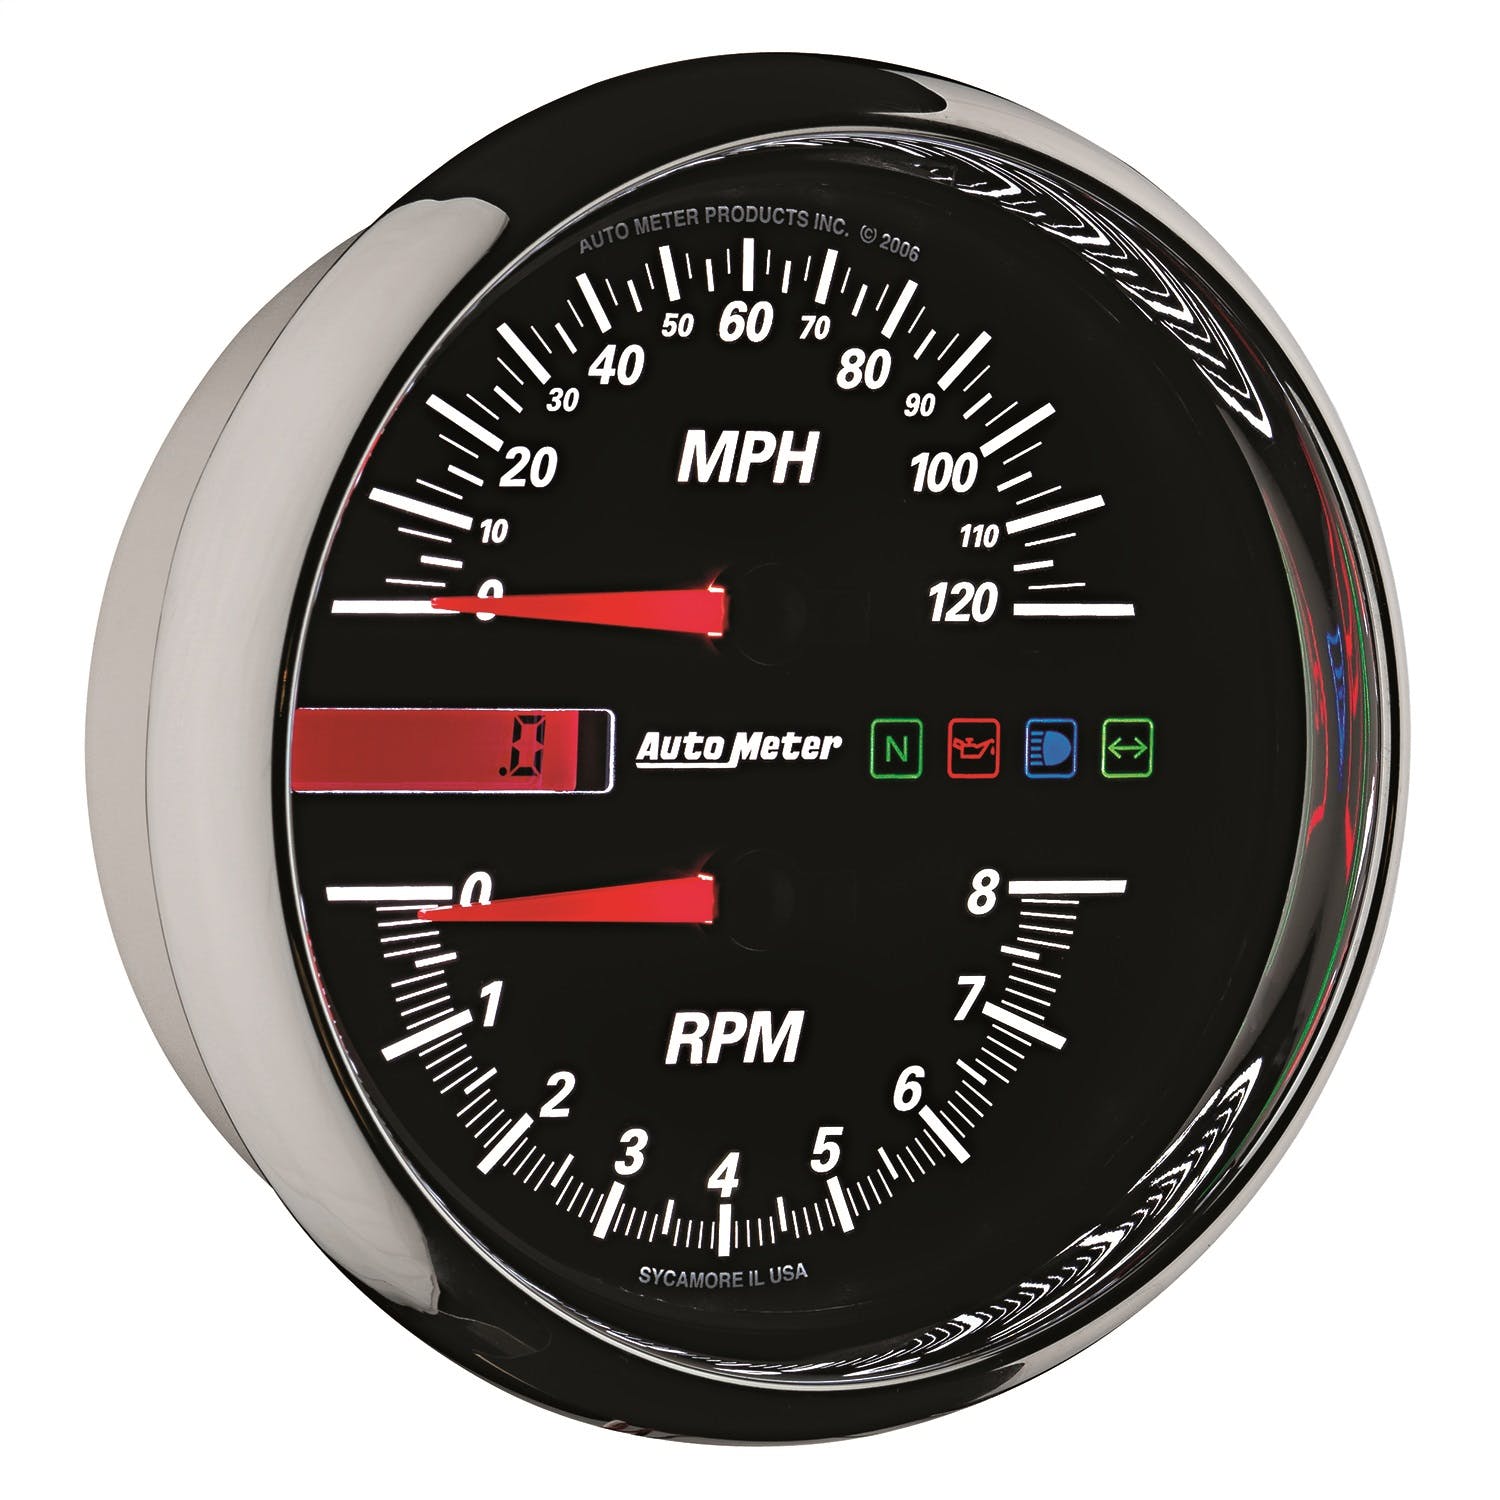 AutoMeter Products 19466 Tachometer/Speedometer Gauge, Black-Pro Cycle 4 1/2, 8K RPM/120 MPH